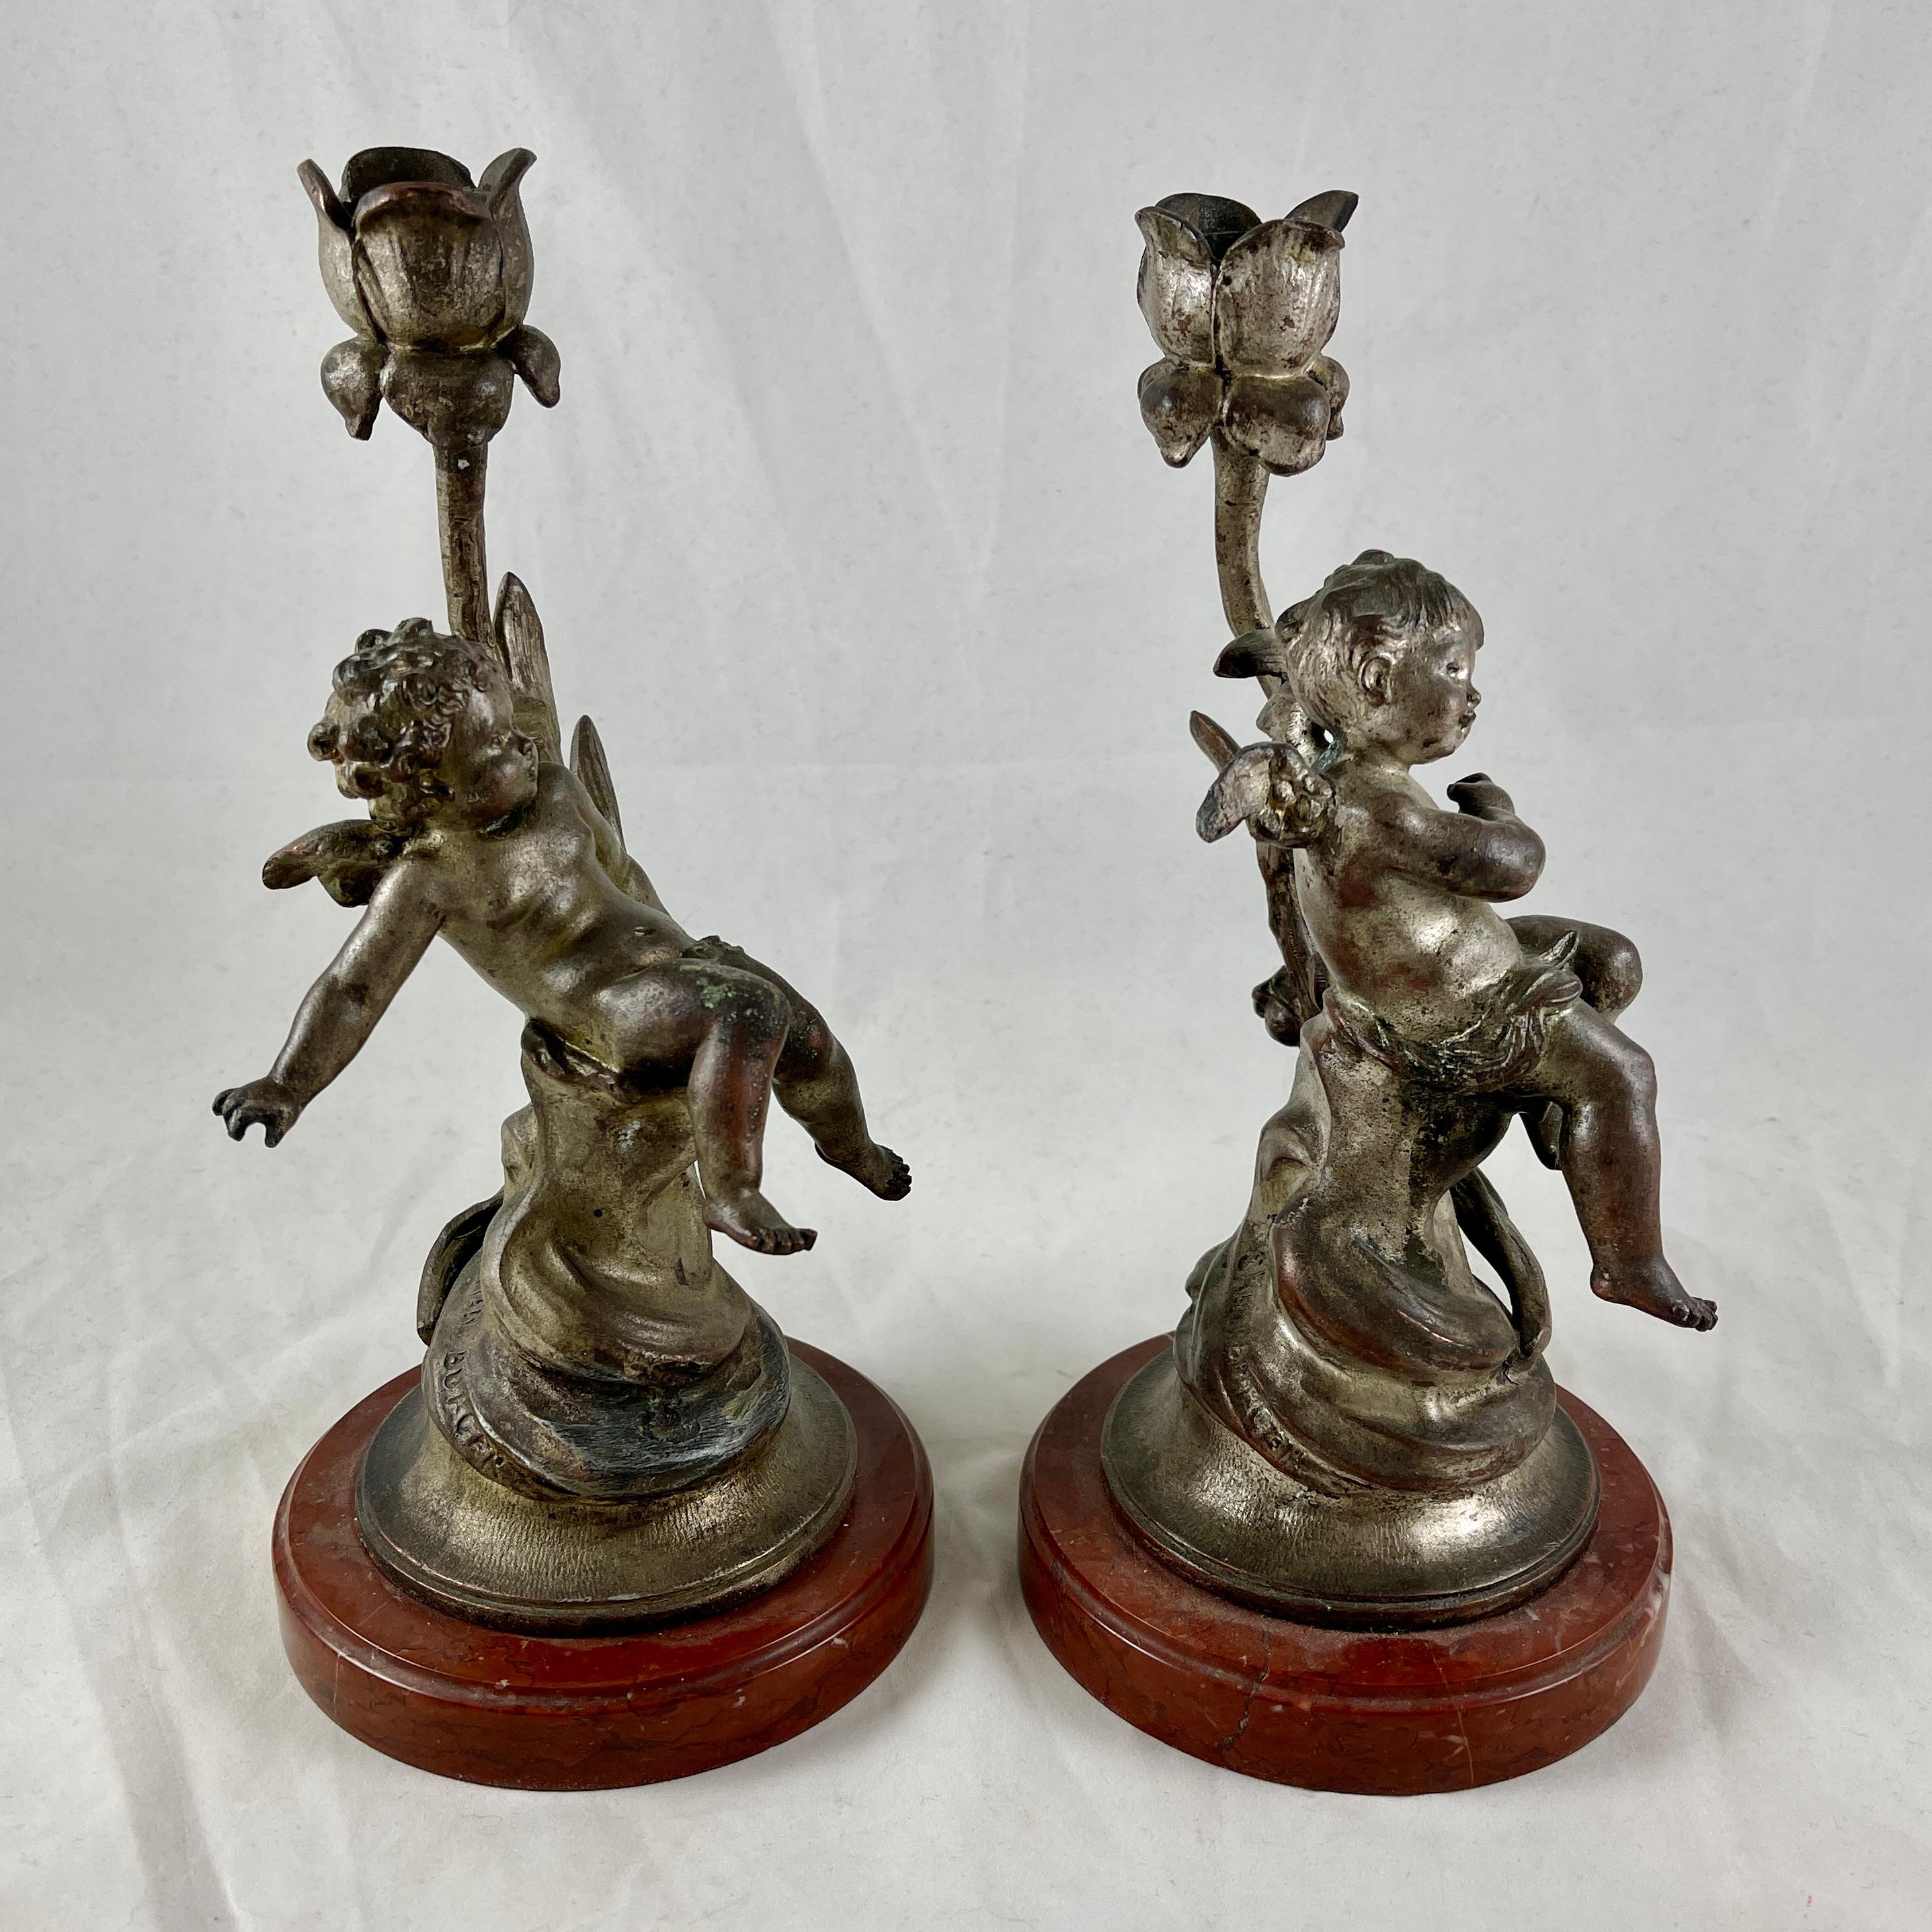 French Putti Cherub Candlesticks Signed Sylvain Kinsburger Spelter & Marble S/2 For Sale 2